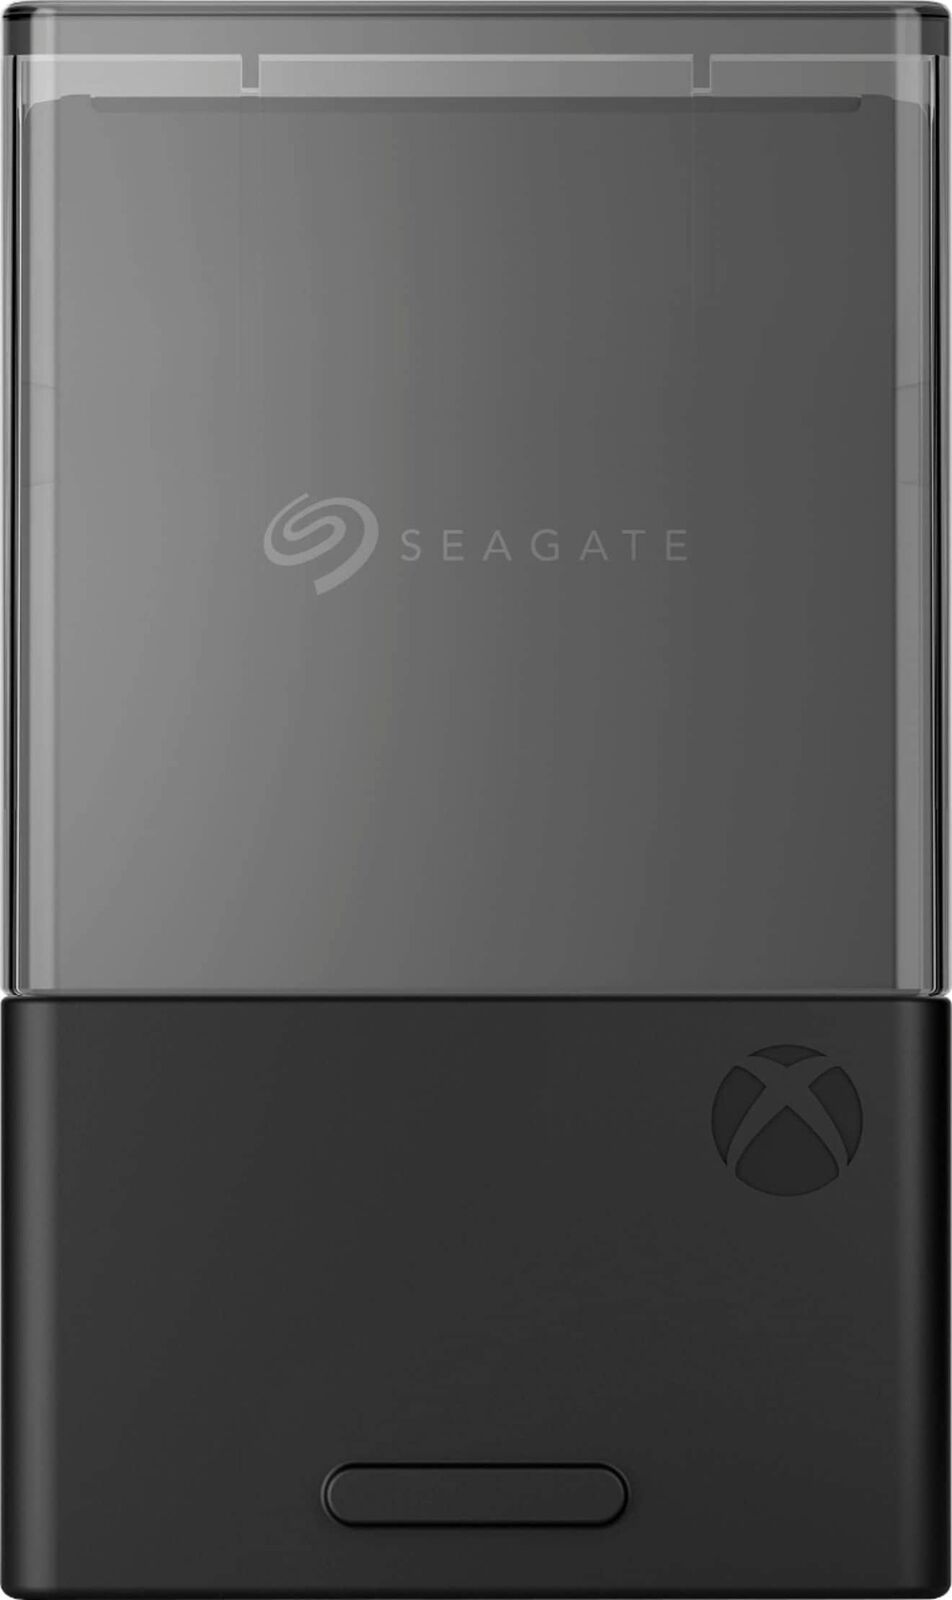 Seagate Storage Expansion Card for Xbox Series X|S 1TB Solid State Drive - NVMe Expansion SSD (STJR1000400)